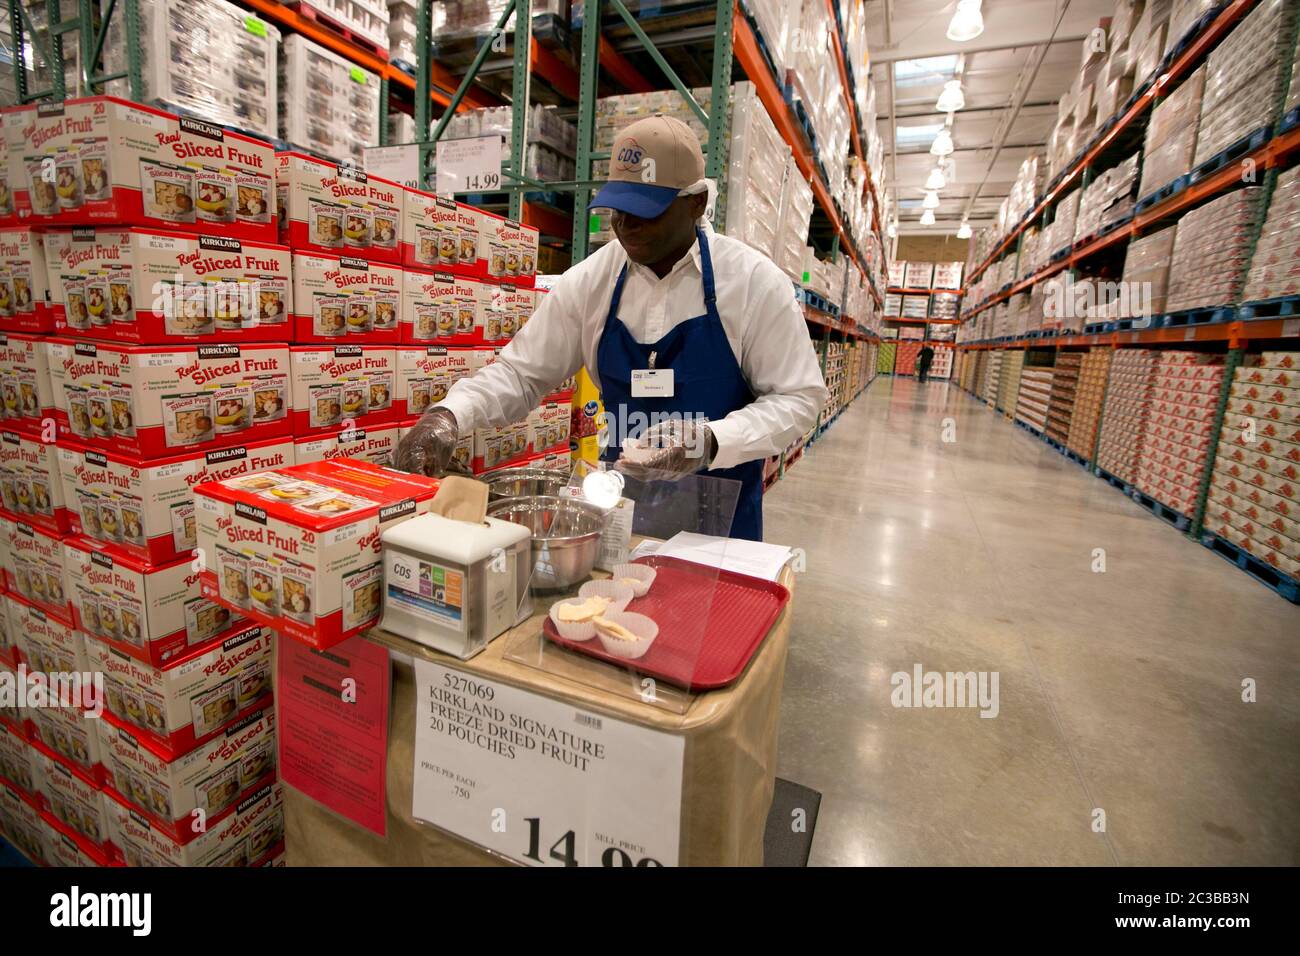 Cedar Park Texas USA, November 22 2013: Employee sets up free samples of fruit topping at newly opened Costco warehouse club in a fast-growing Austin suburb.   ©Marjorie Kamys Cotera/Daemmrich Photography Stock Photo